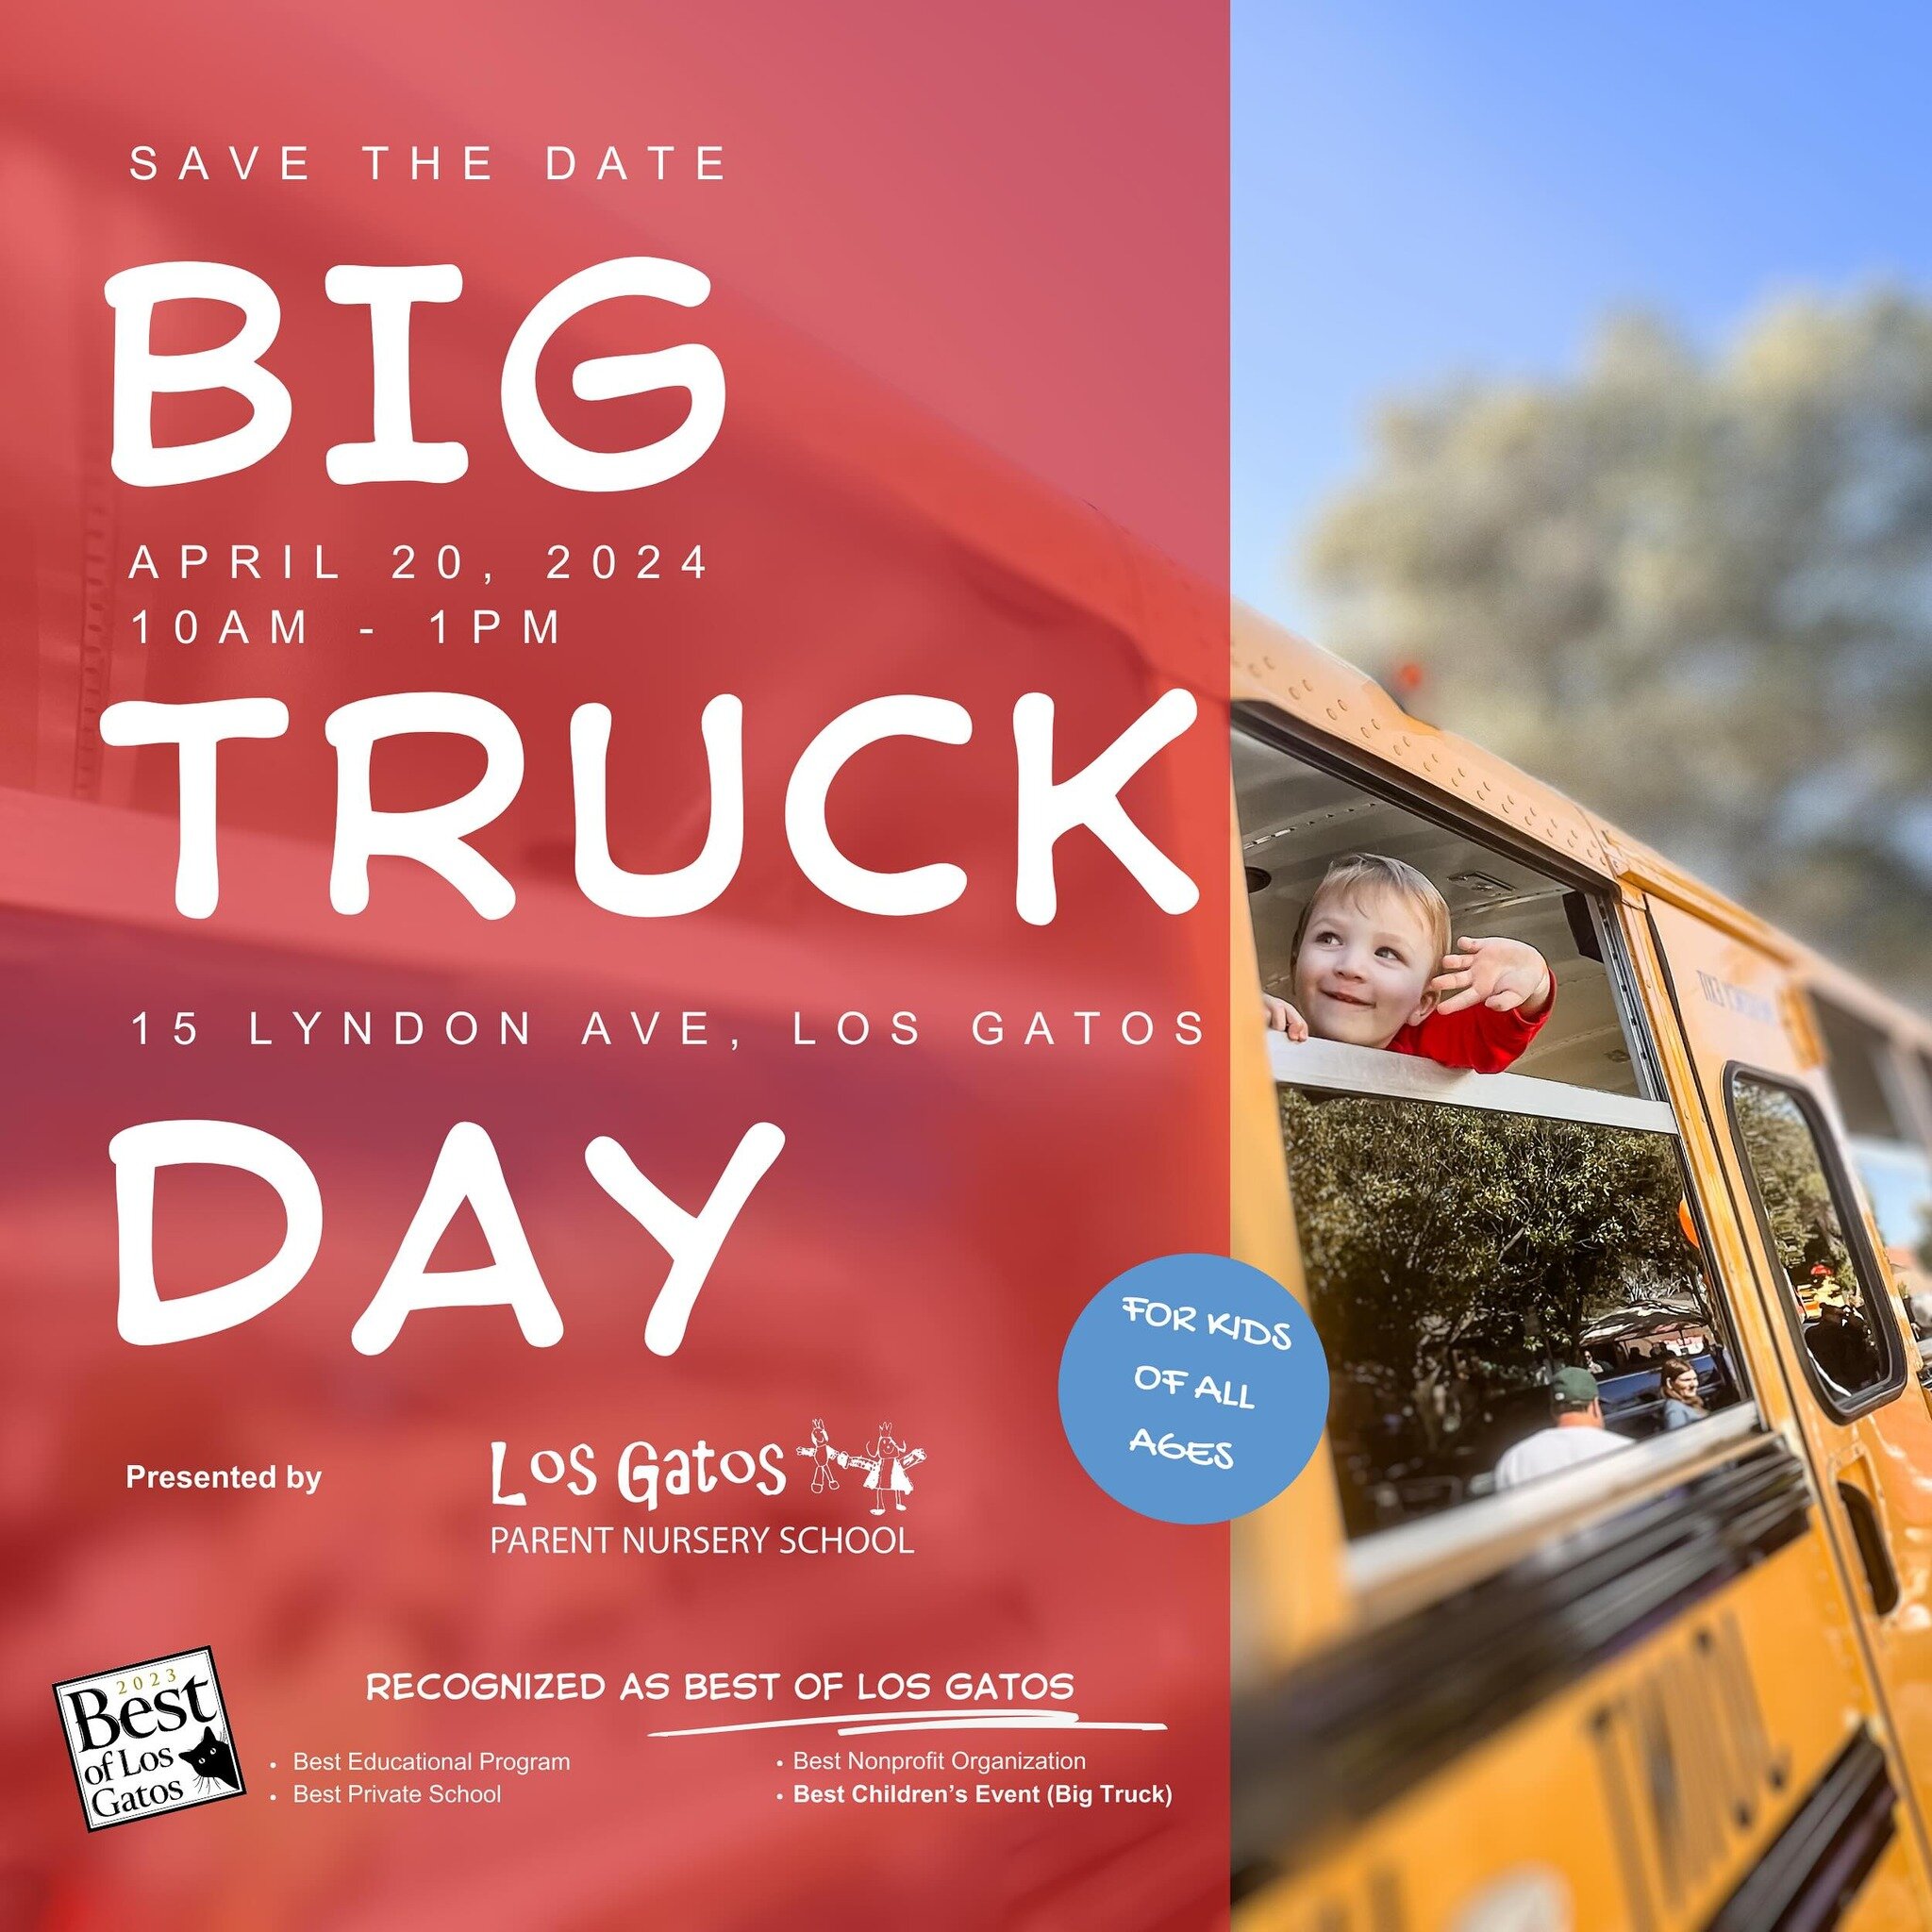 🚛🎉 Have you snagged your tickets for BIG TRUCK DAY yet? 🎟️

Experience the thrill of seeing, sitting, and touching big equipment for big fun at Big Truck Day! Enjoy a bounce house, face painting, delicious food, and much more! 🚛🎨🍔 

🚨 Plus get